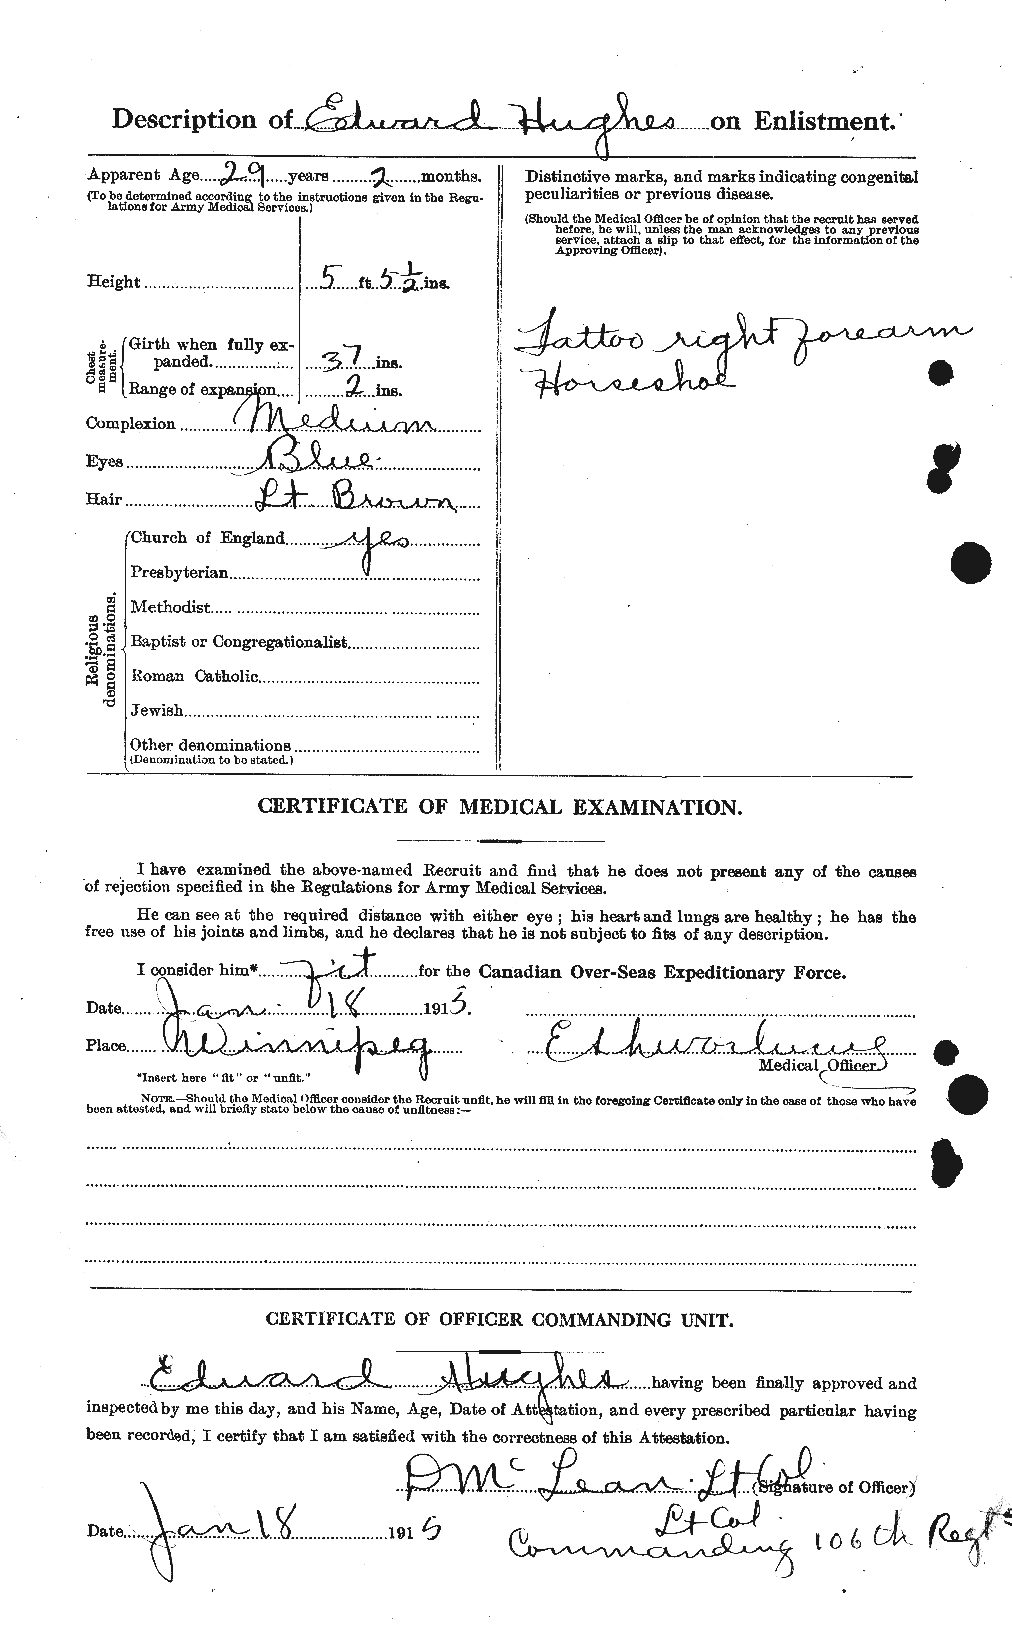 Personnel Records of the First World War - CEF 402661b